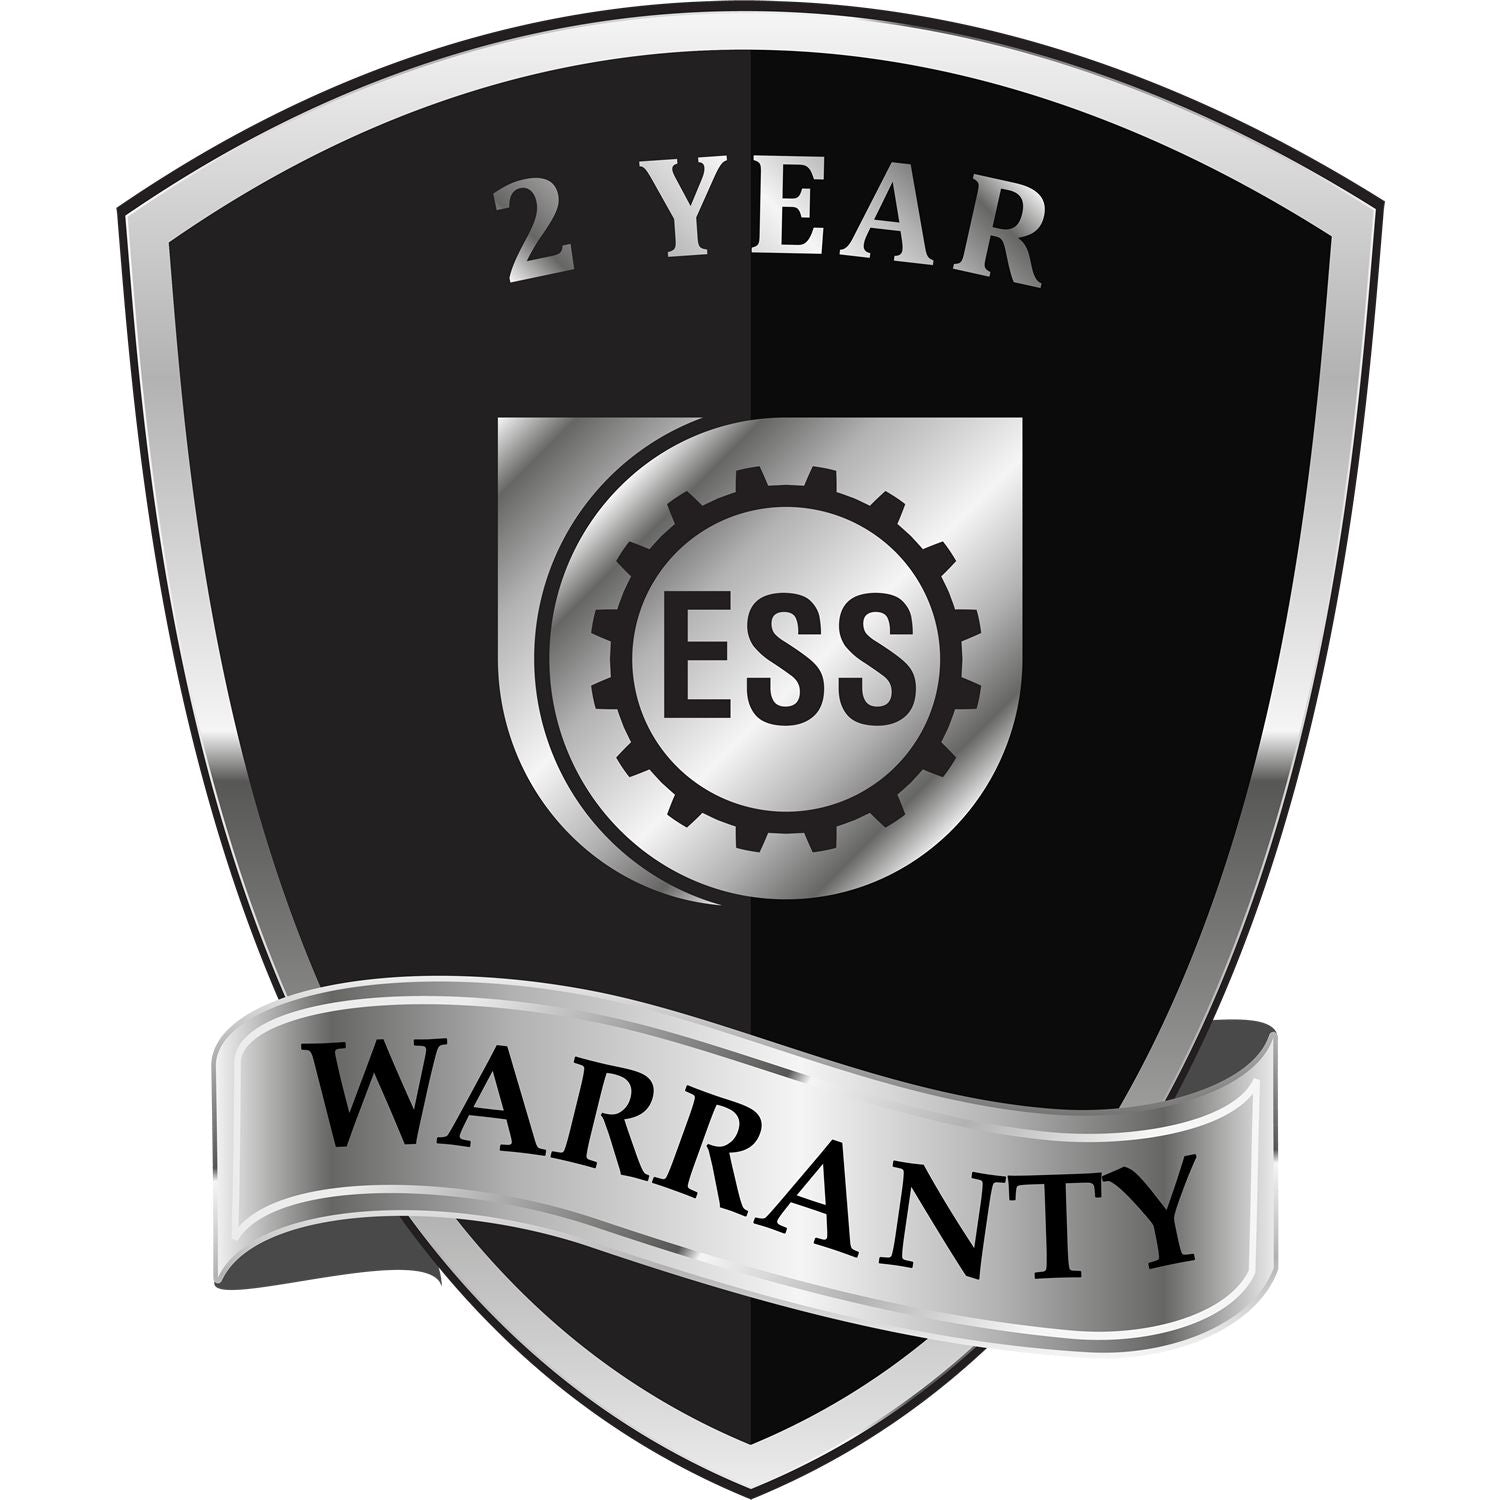 A badge or emblem showing a warranty icon for the Long Reach Puerto Rico PE Seal